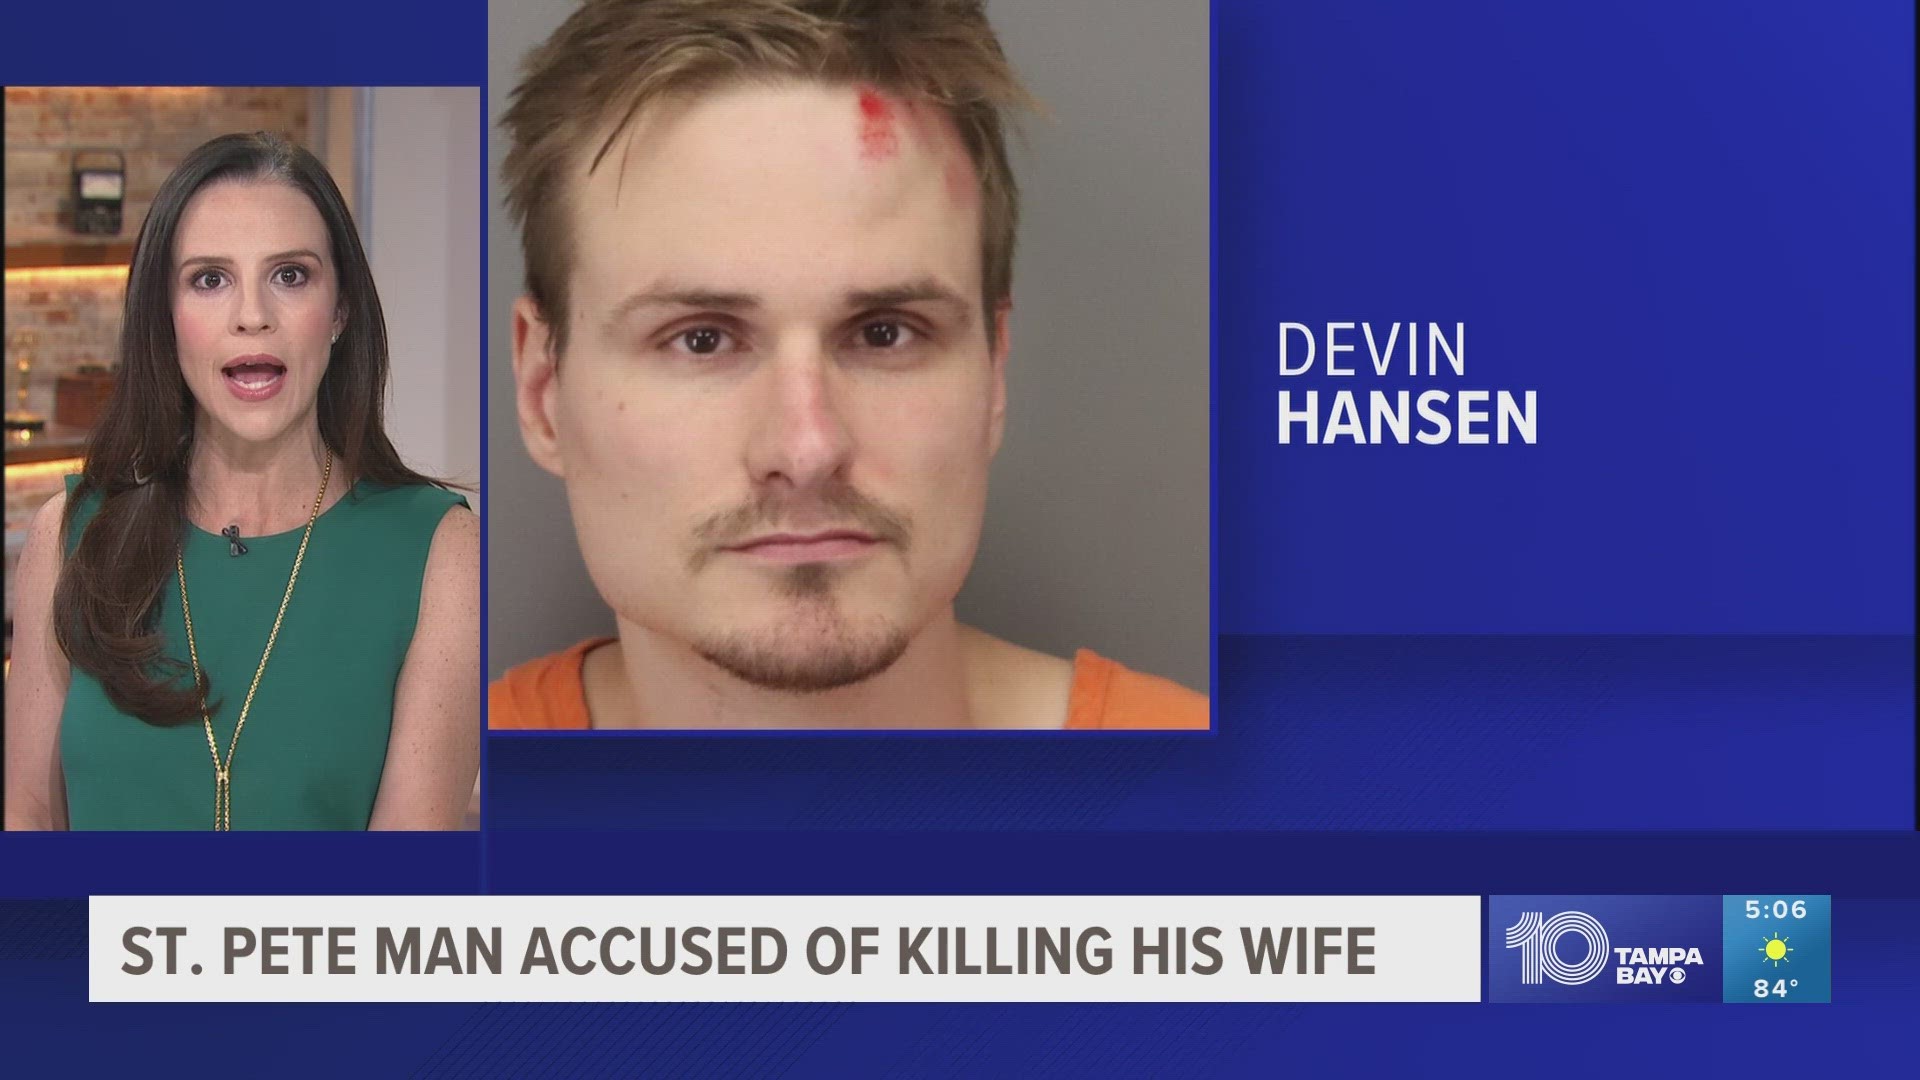 St. Pete police said Devin Hansen was arguing with his wife before the shooting.